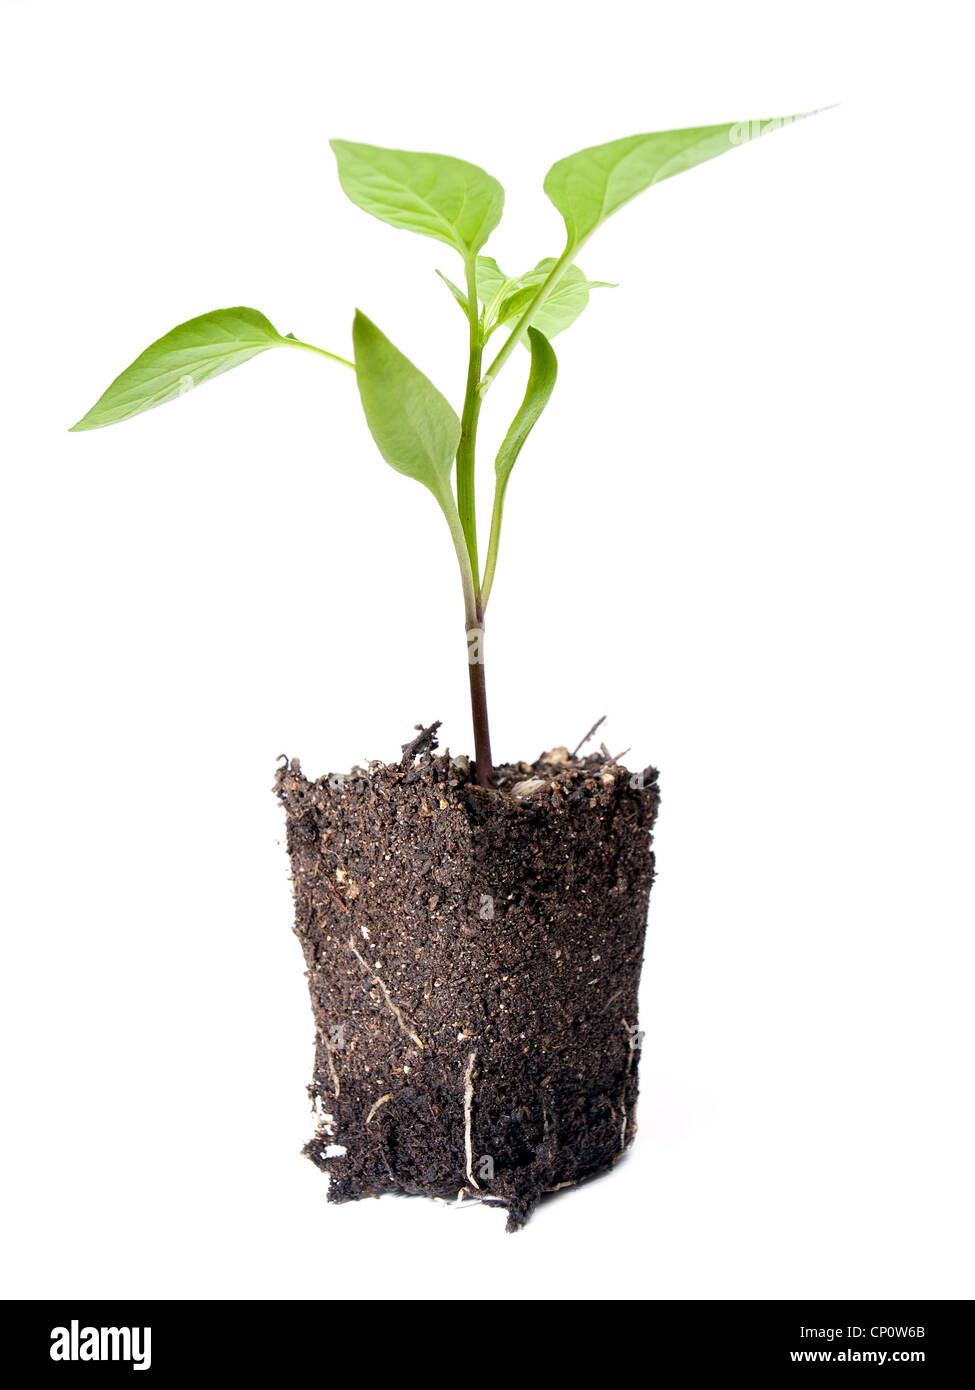 Young plant of future crops on a white background. Stock Photo